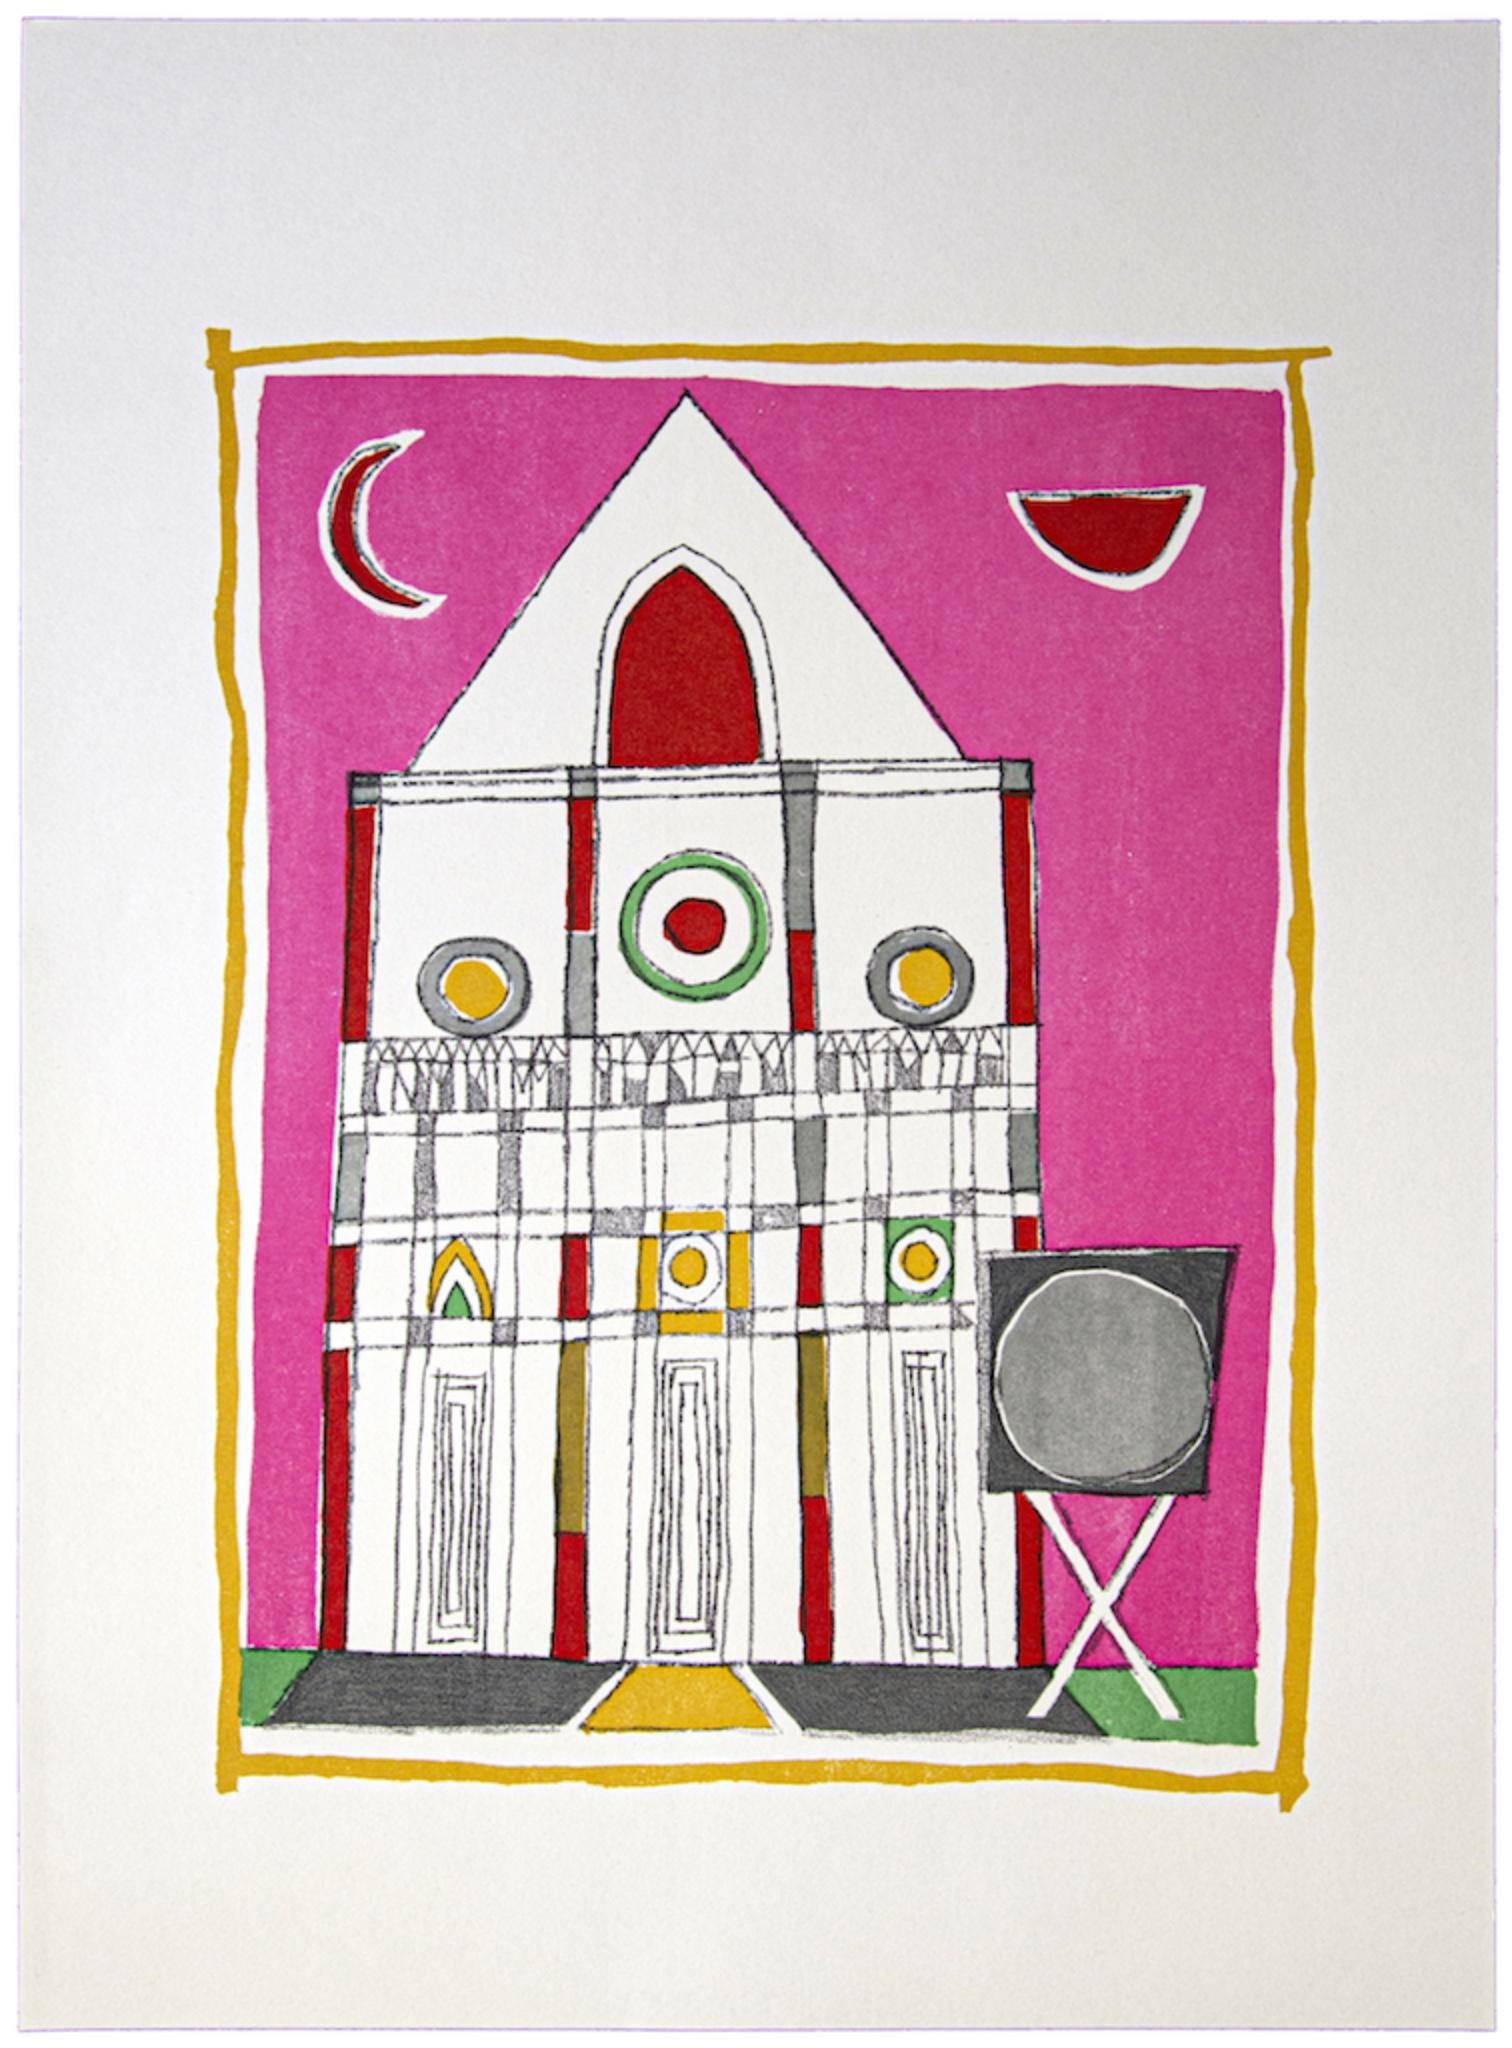 The Cathedral is an original Vintage Offset Print on ivory-colored paper, realized by Franco Gentilini (Italian Painter, 1909-1981), in 1970s.

The state of preservation of the artwork is excellent.

Franco Gentilini (Italian Painter, 1909-1981):